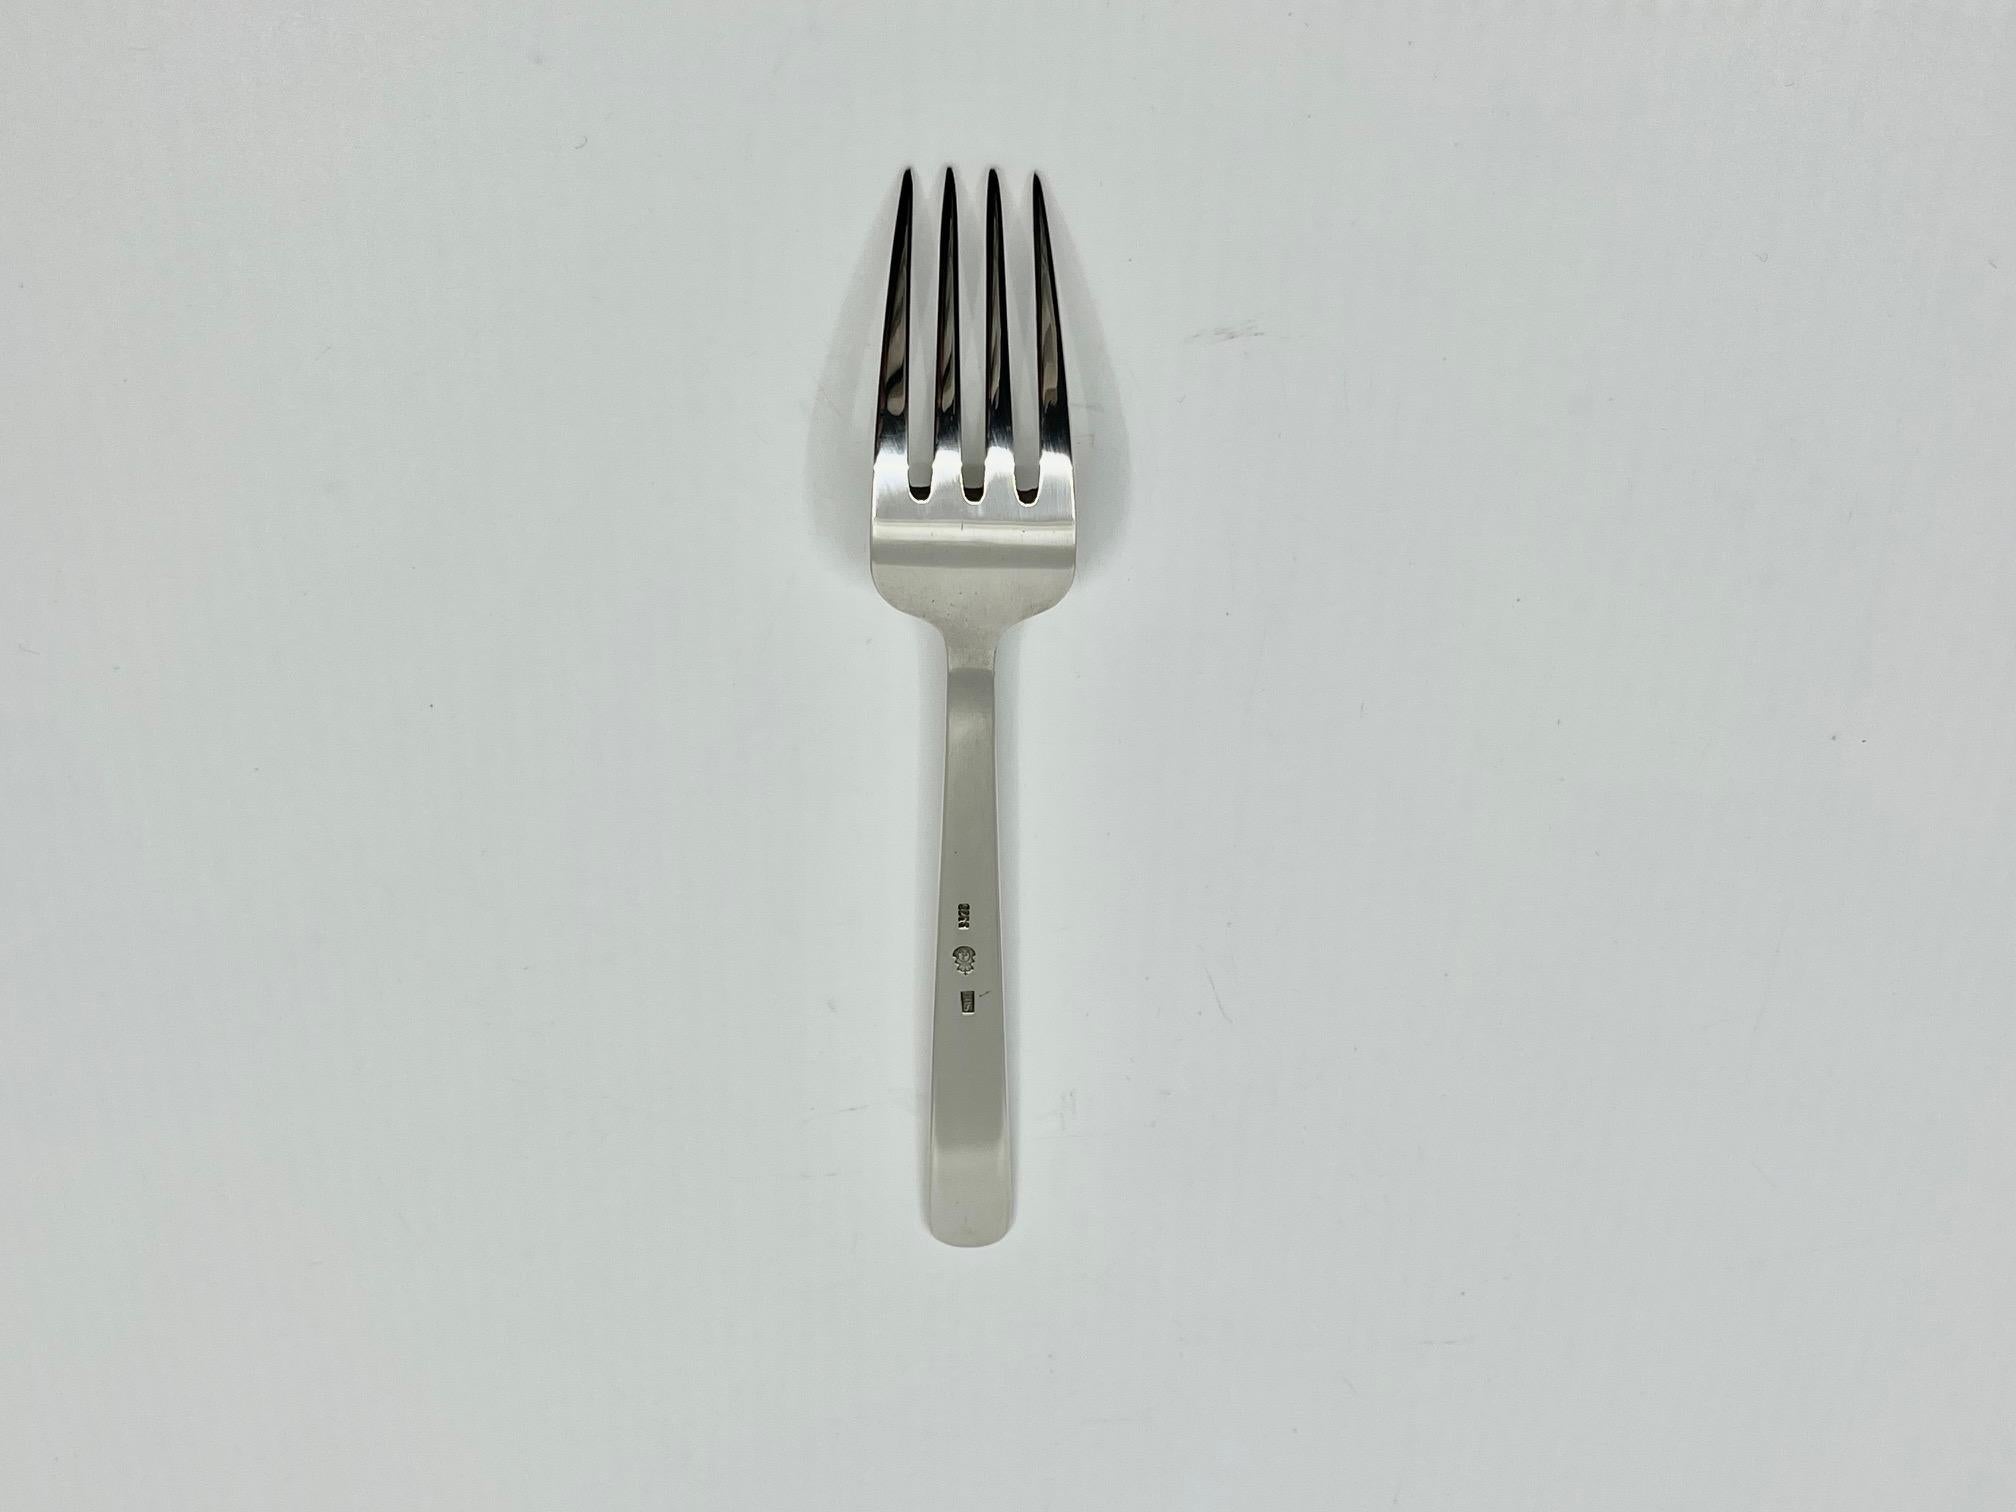 A sterling silver lunch/salad fork in the Grand Prix pattern, designed by Kay Bojesen in 1938.

Additional information:
Material: Sterling silver
Styles: Modern
Hallmarks: Marked with the Kay Bojesen buoy logo and “925S KBS”.
Dimensions: Measures 6